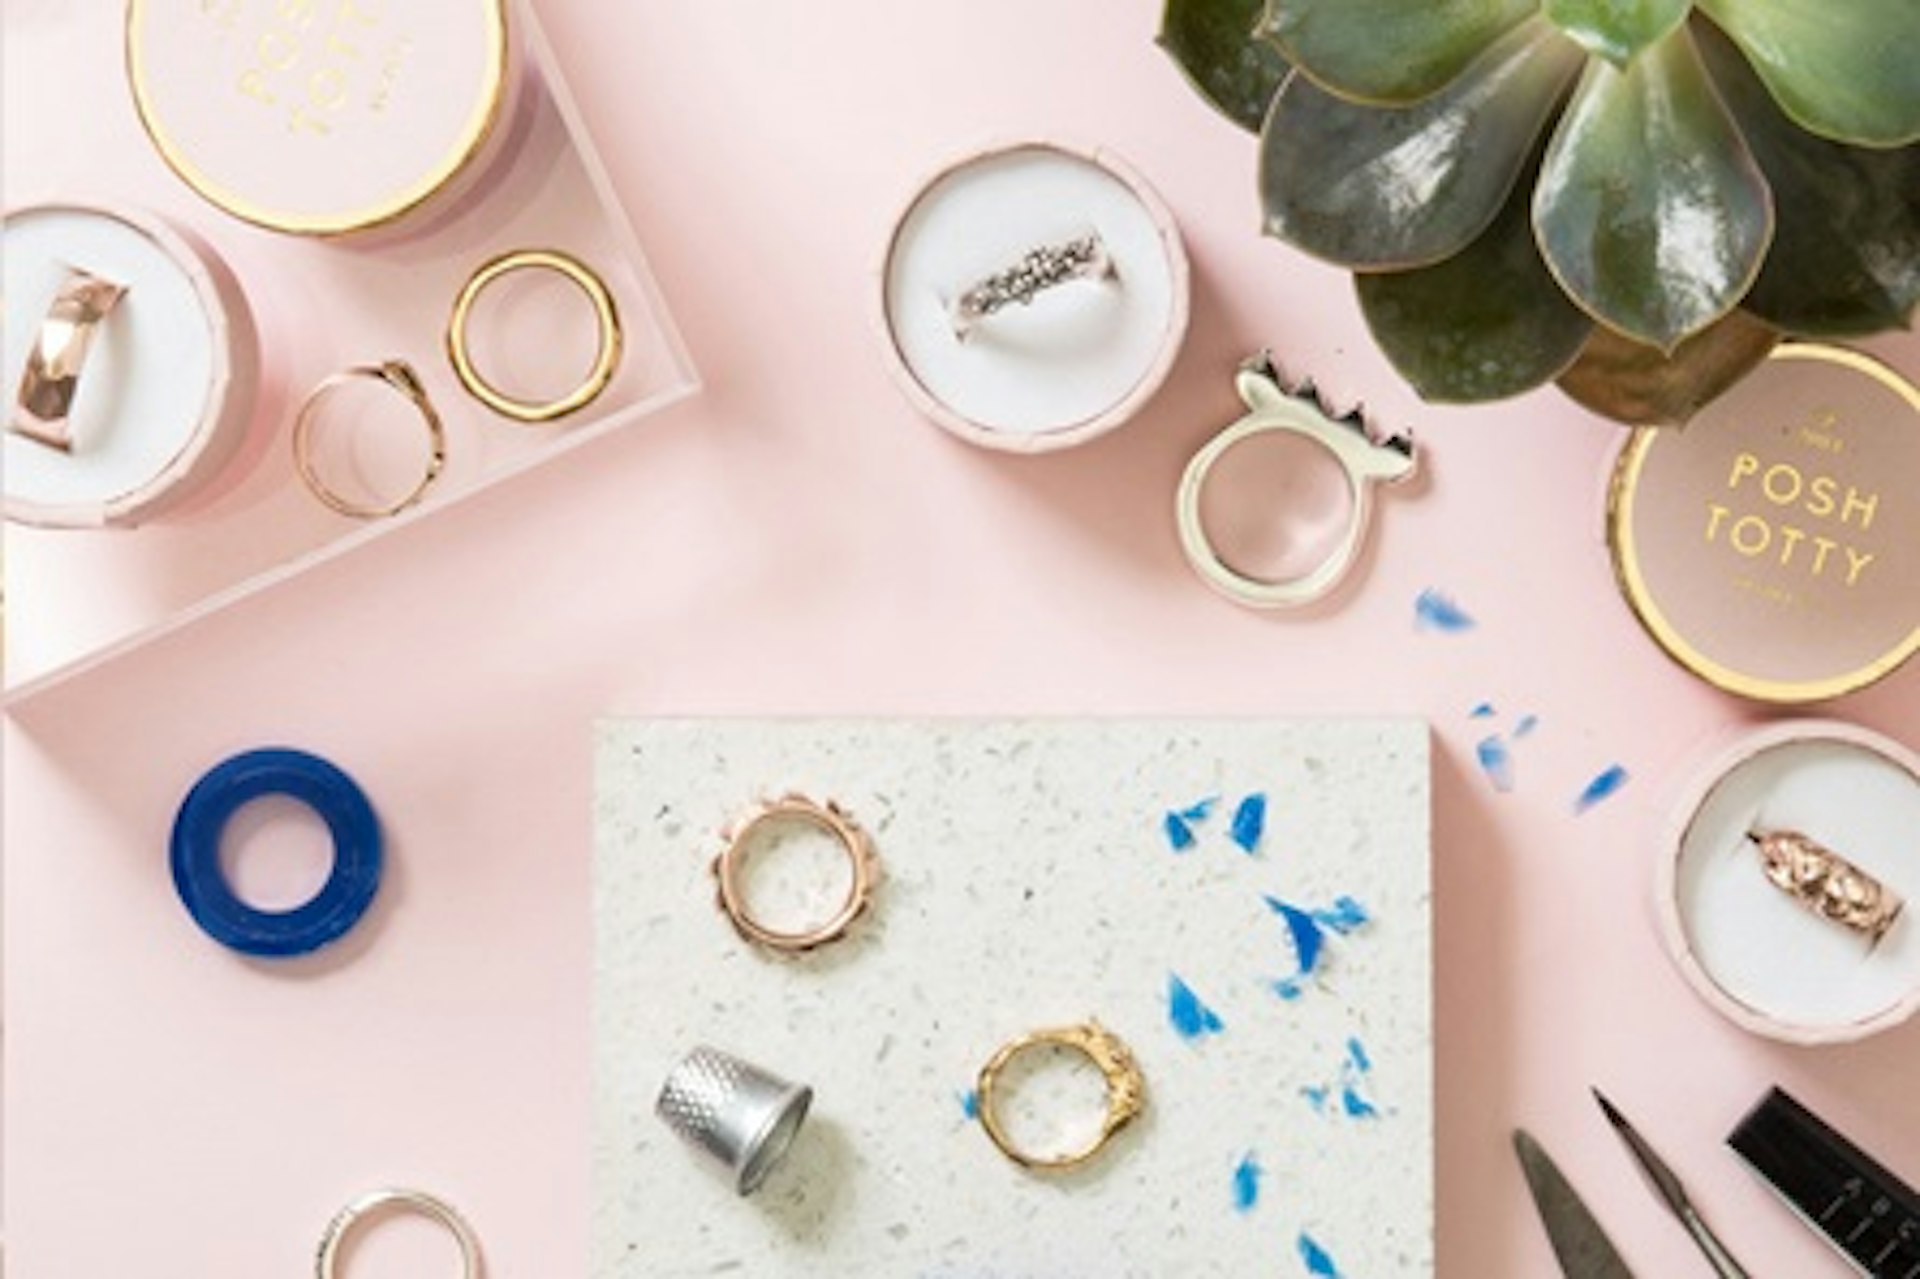 Personalised Ring Making Workshop with Prosecco for Two at Posh Totty Designs 4